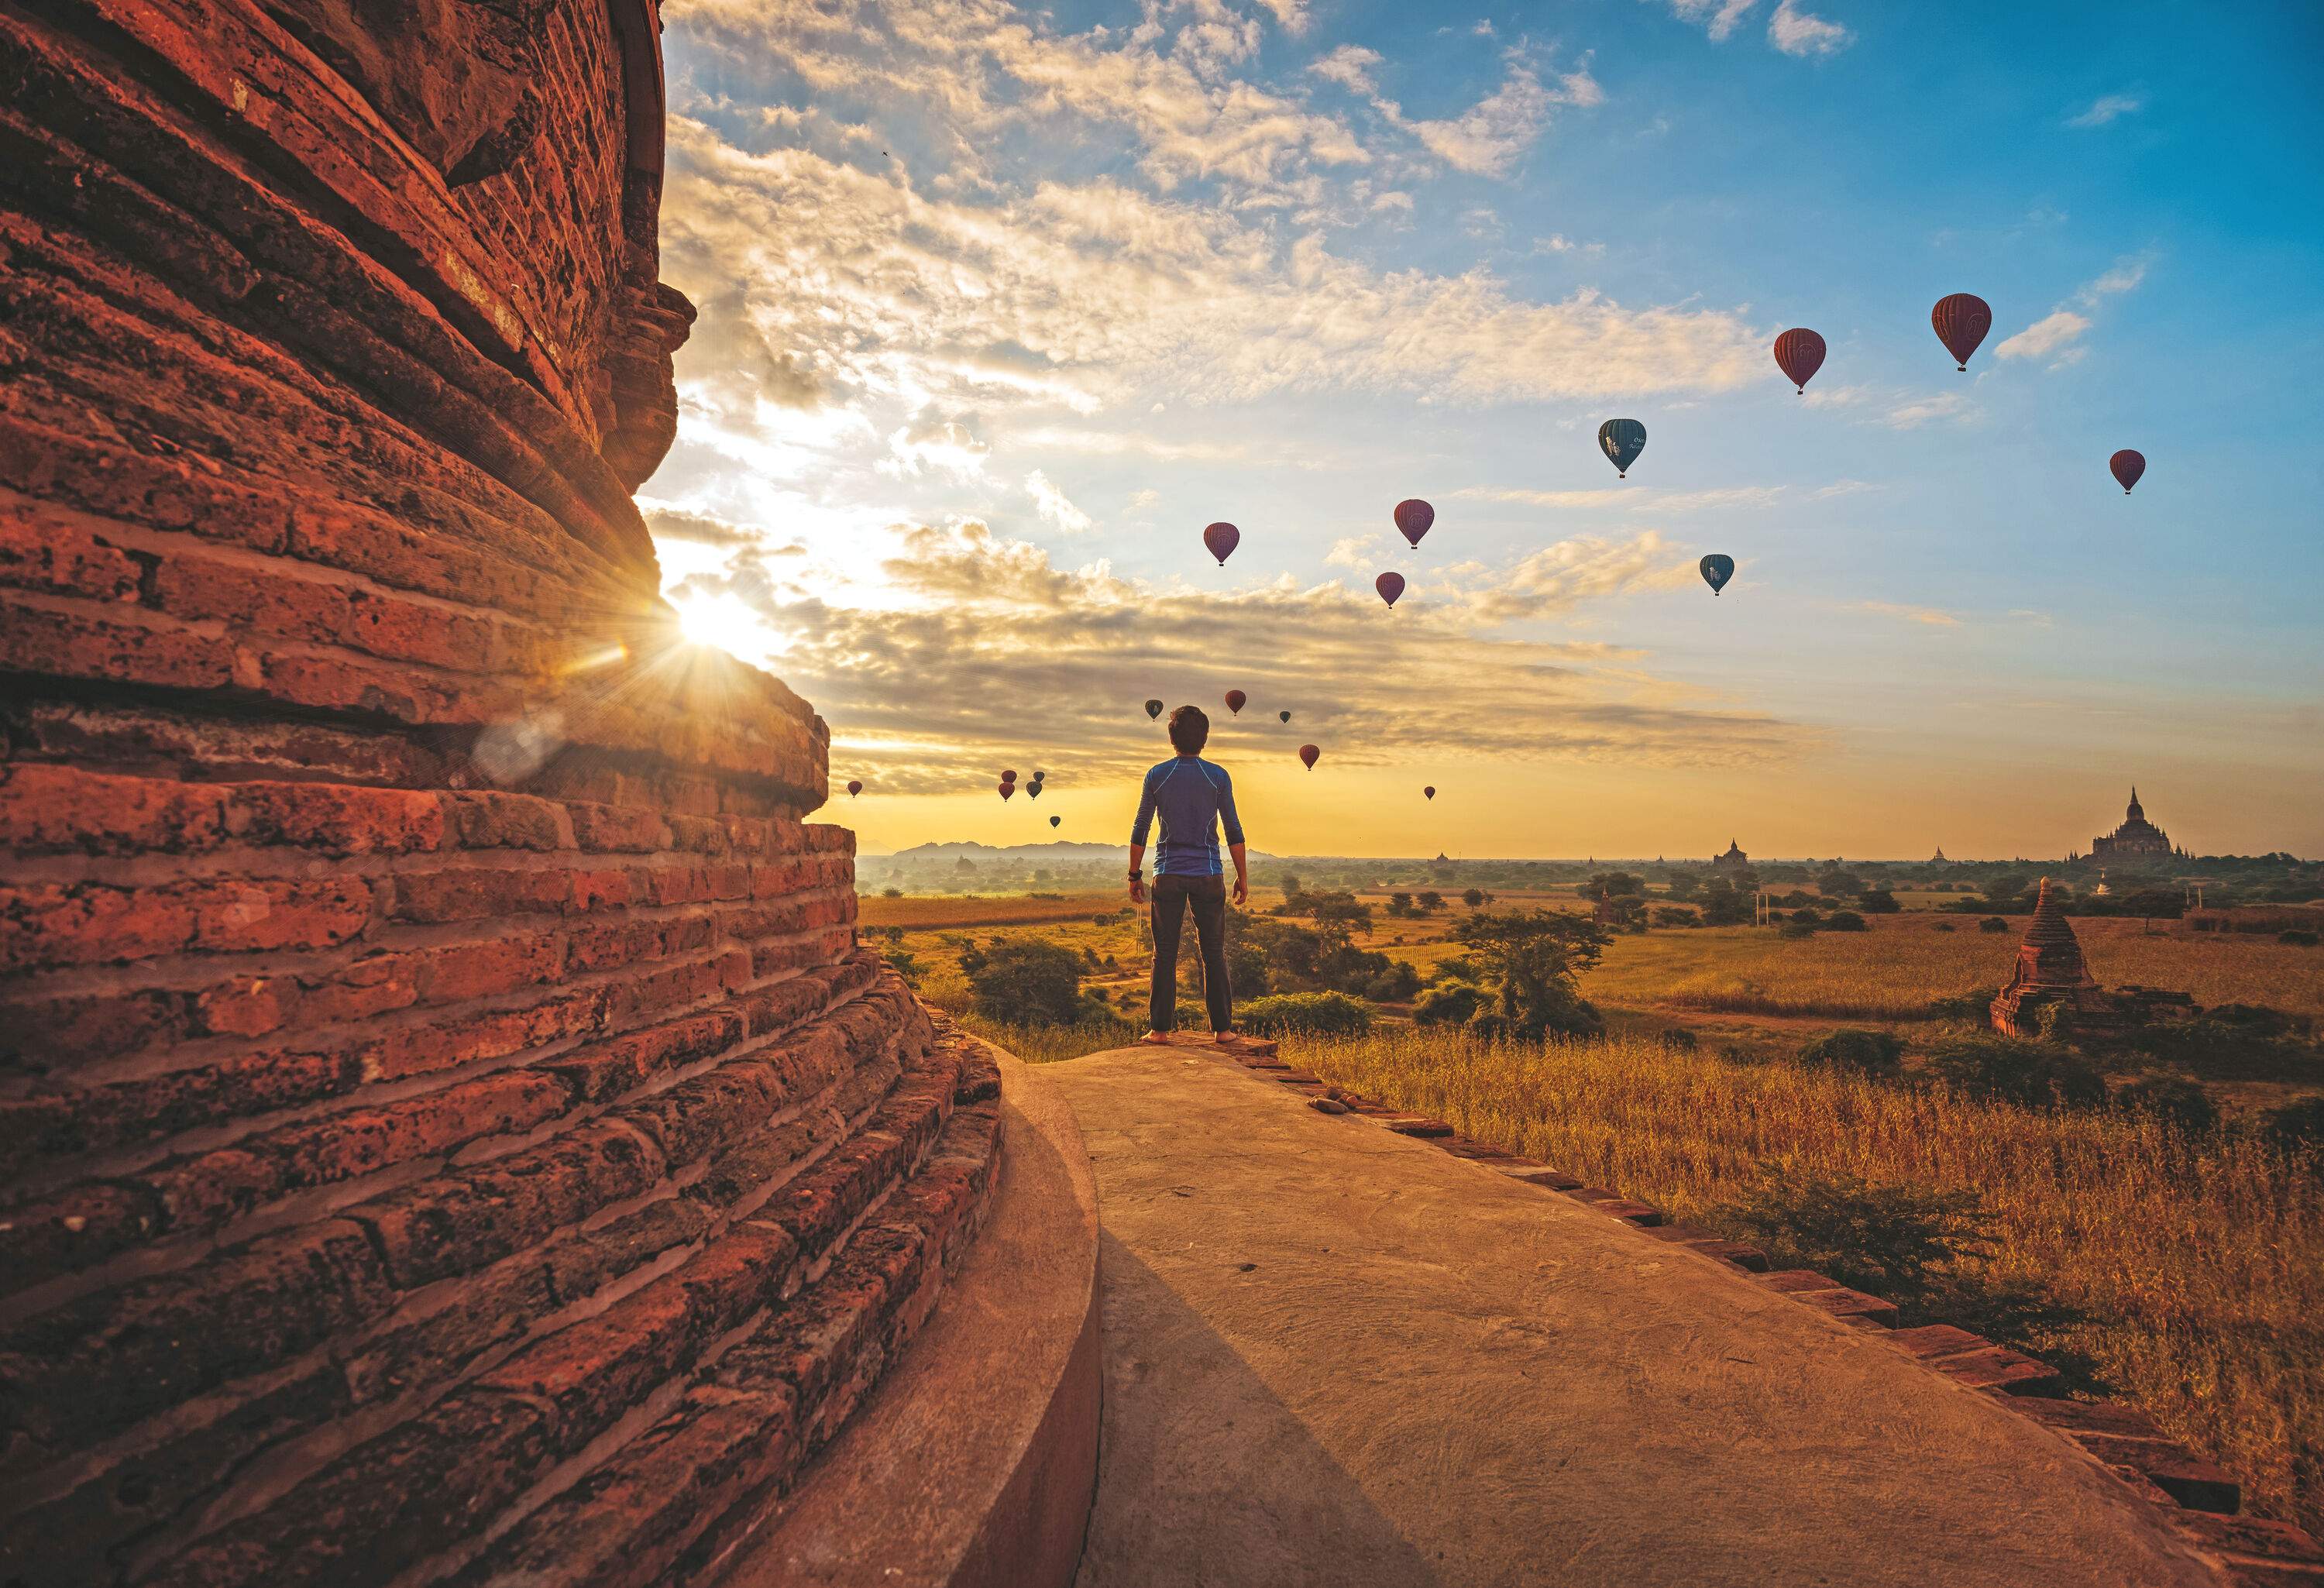 A man stands beside a ruined temple wall, watching the hot air balloons flying against the scenic sky.